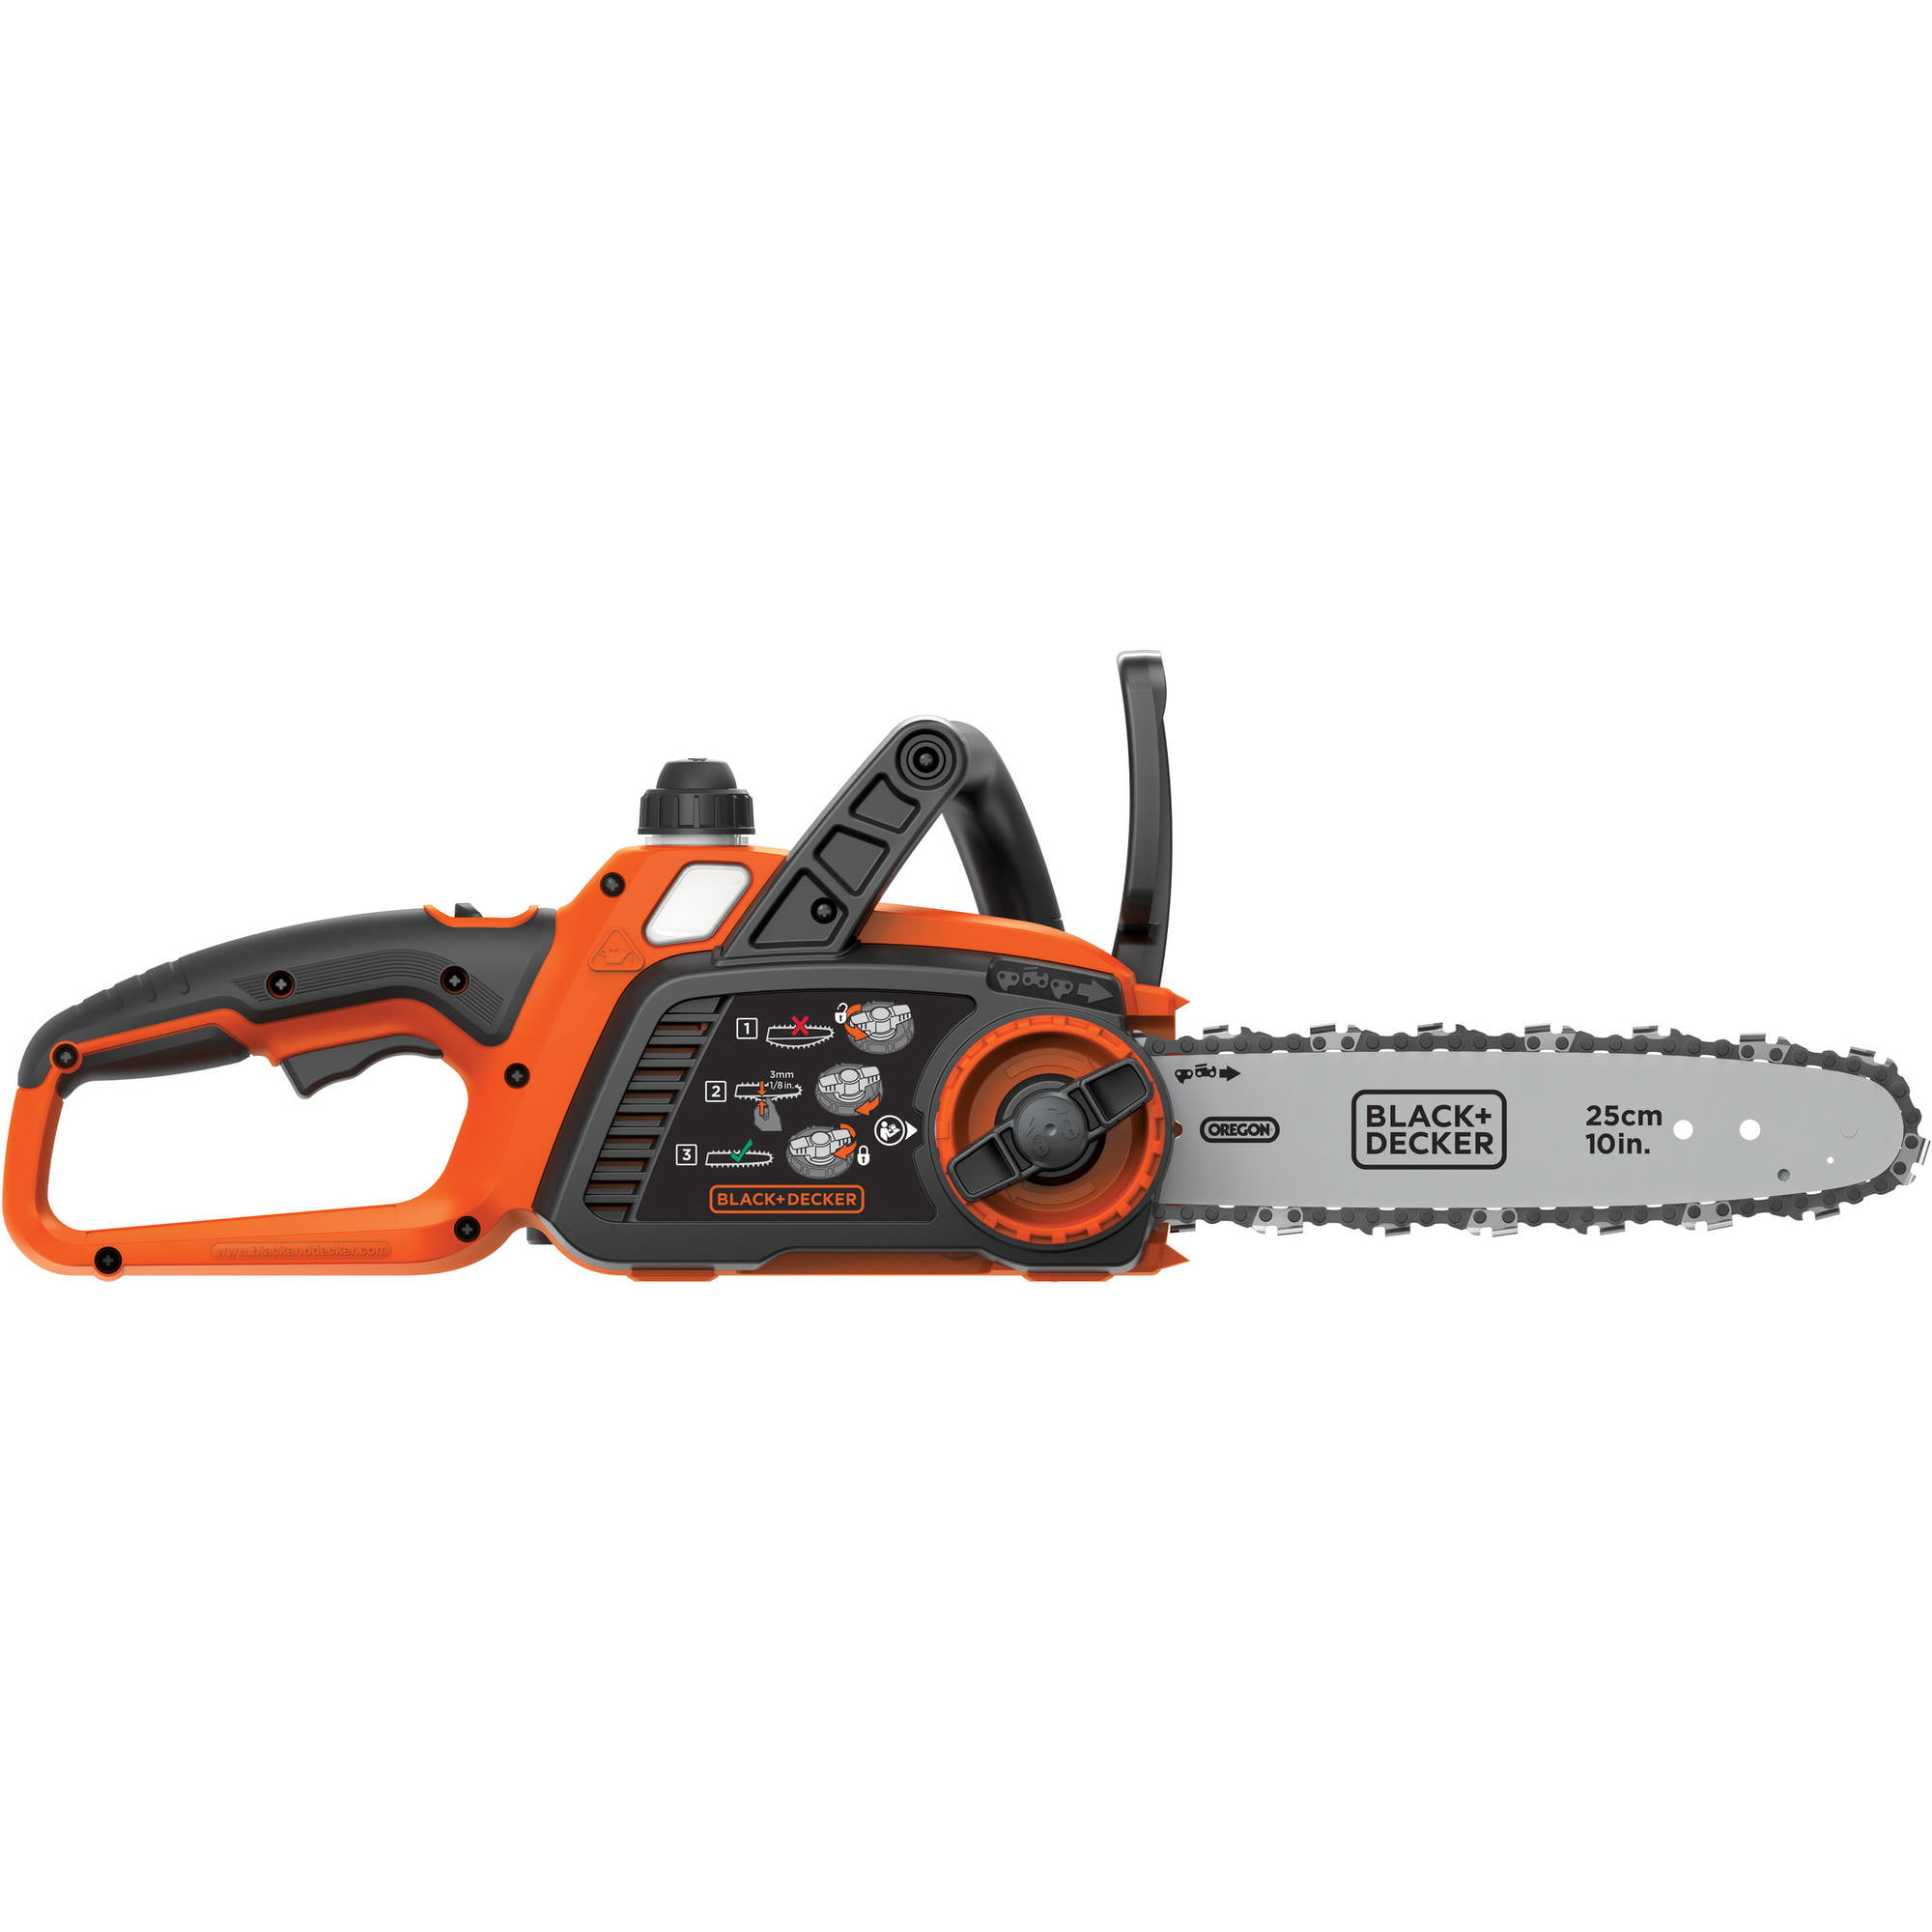 Black & Decker Lcs1020b 20v Max Brushed Lithium-ion 10 In